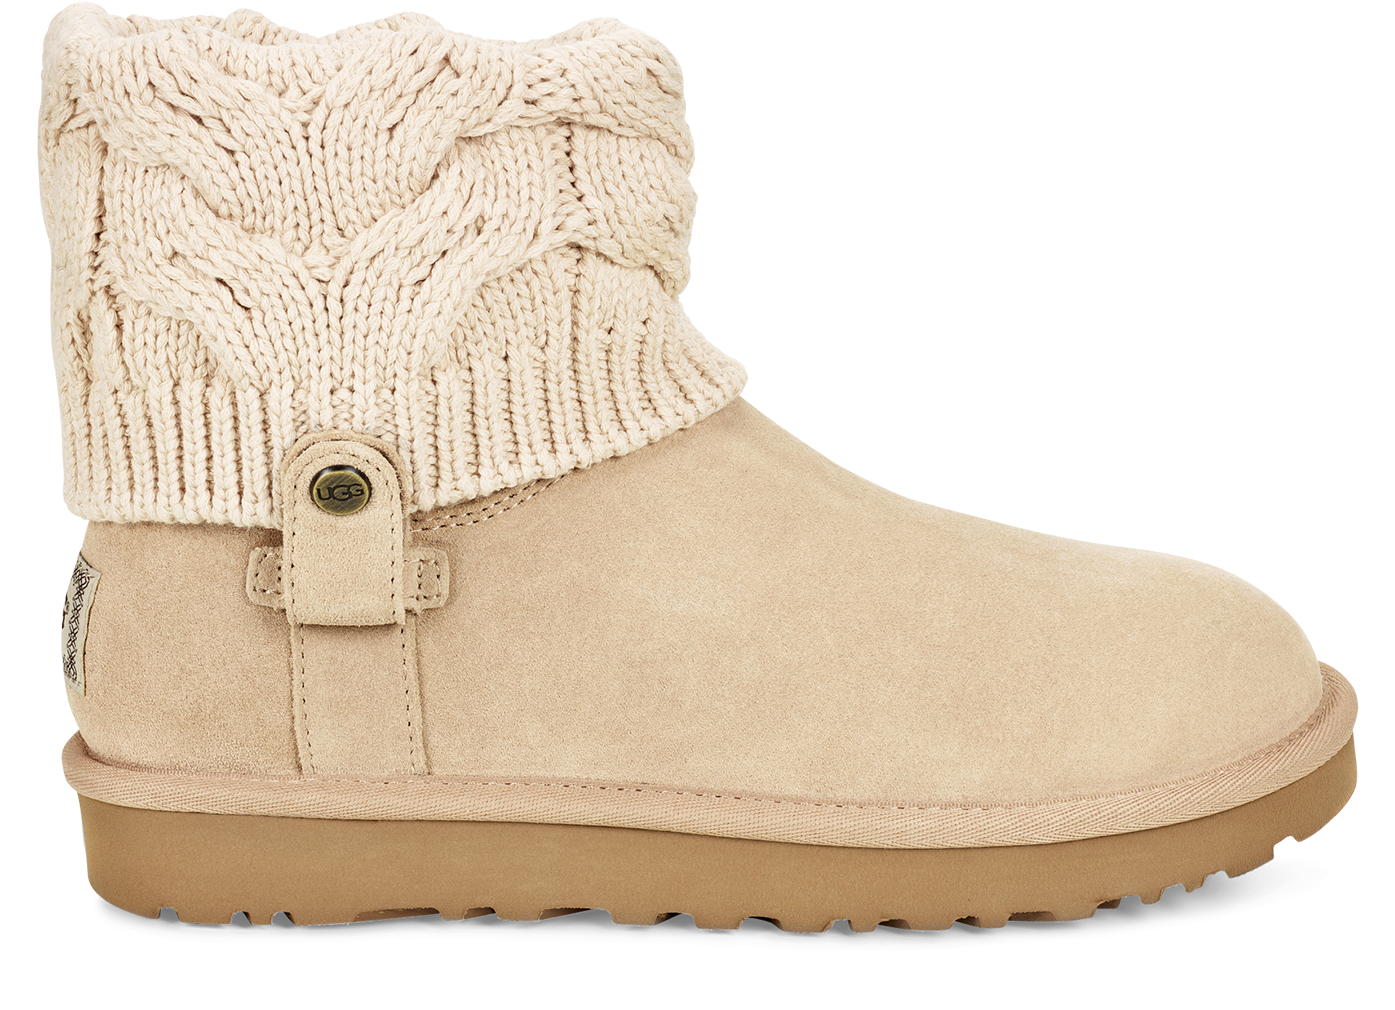 Women's Ugg Saela Sweater Boot Shoes 